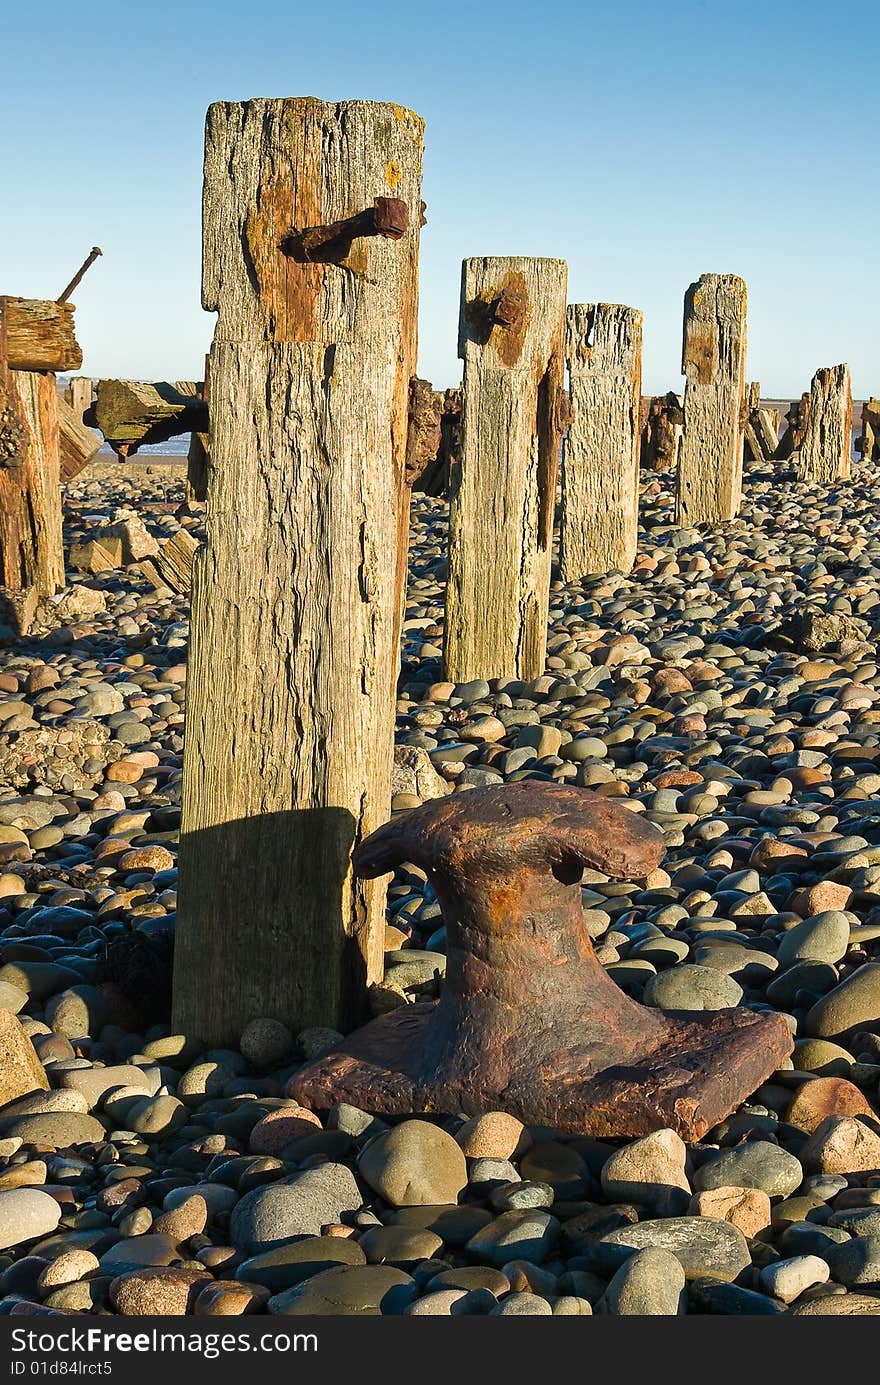 Weathered groynes (sea-defences) and a rusty old bollard. Weathered groynes (sea-defences) and a rusty old bollard